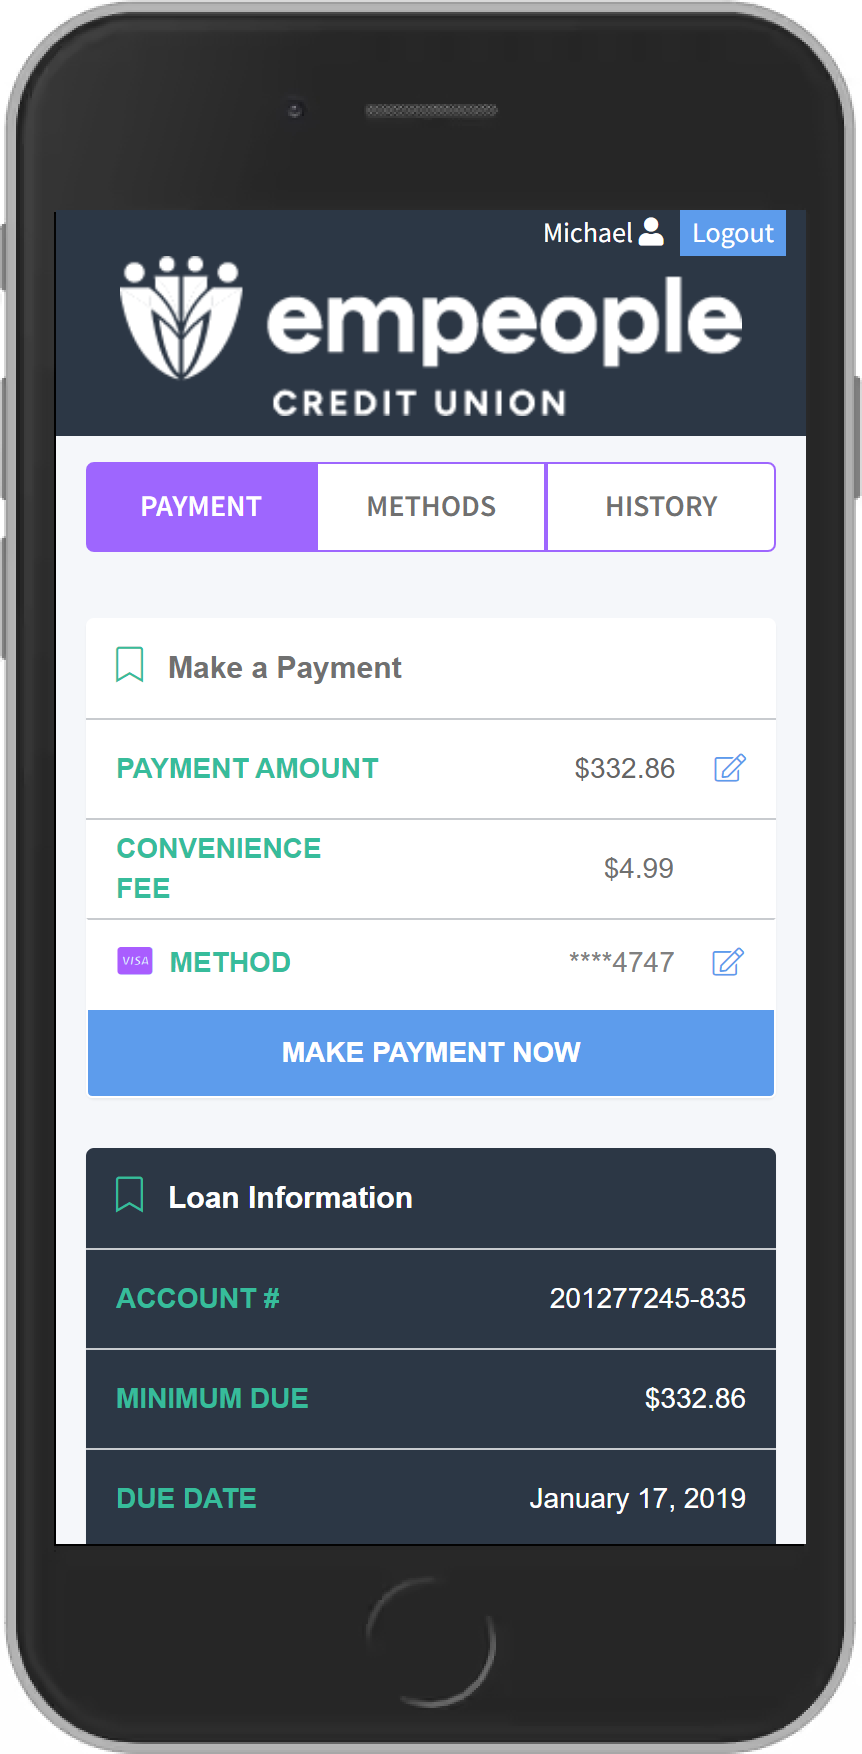 Make Payment now - Empeople